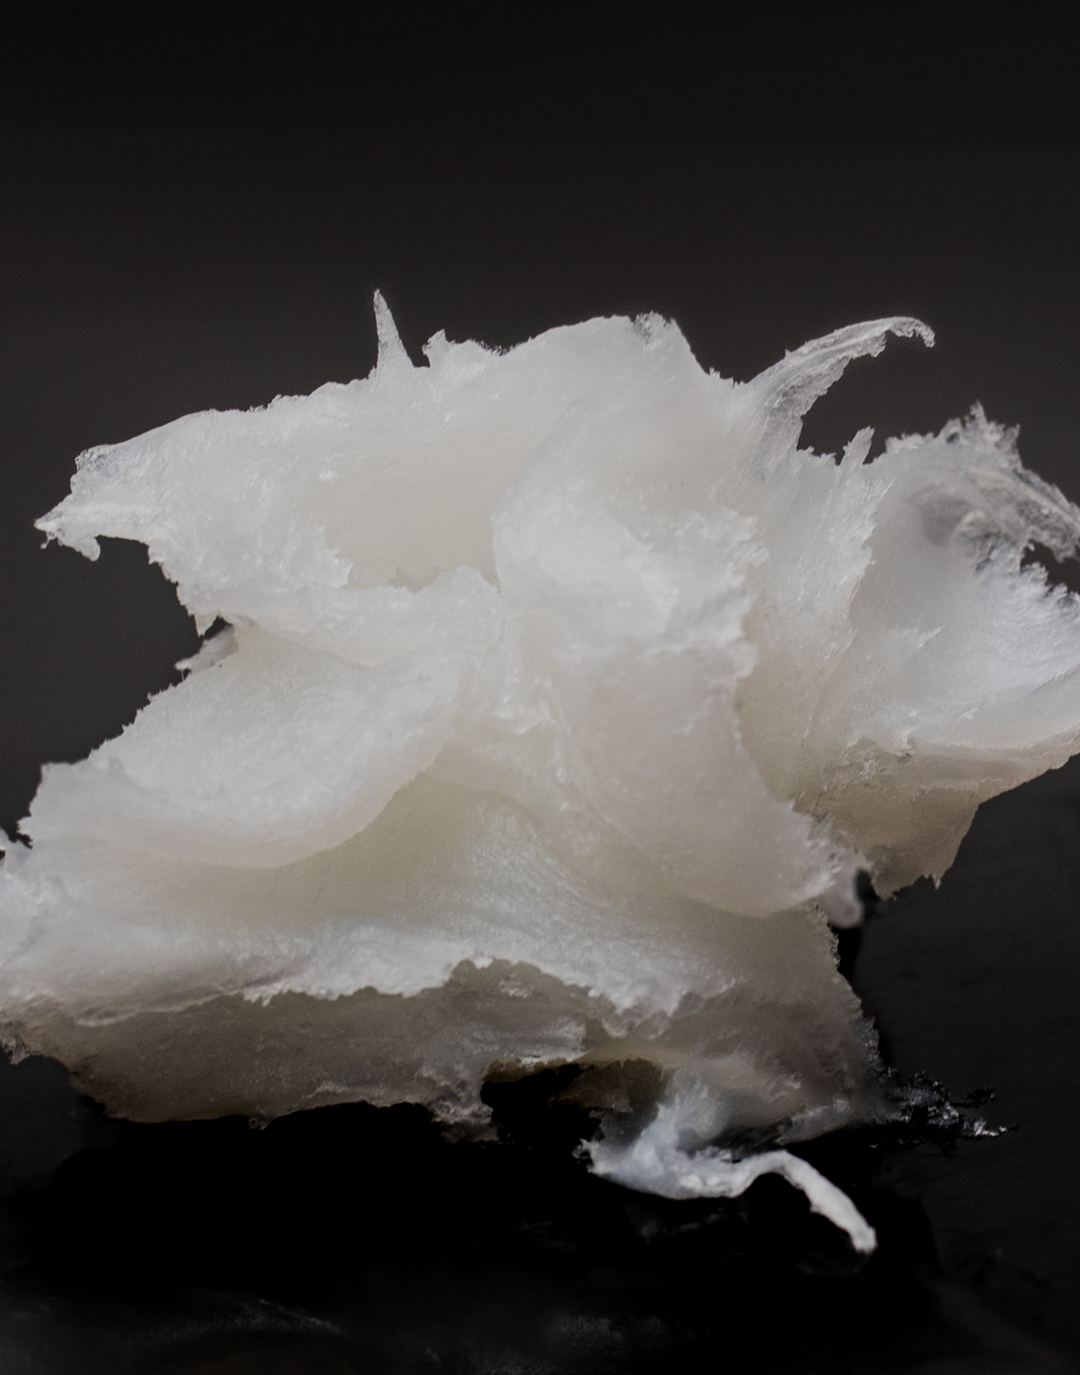 Up-close shot of soft paraffin wax. The wax is white and slightly transparent with a thick jelly-like texture.